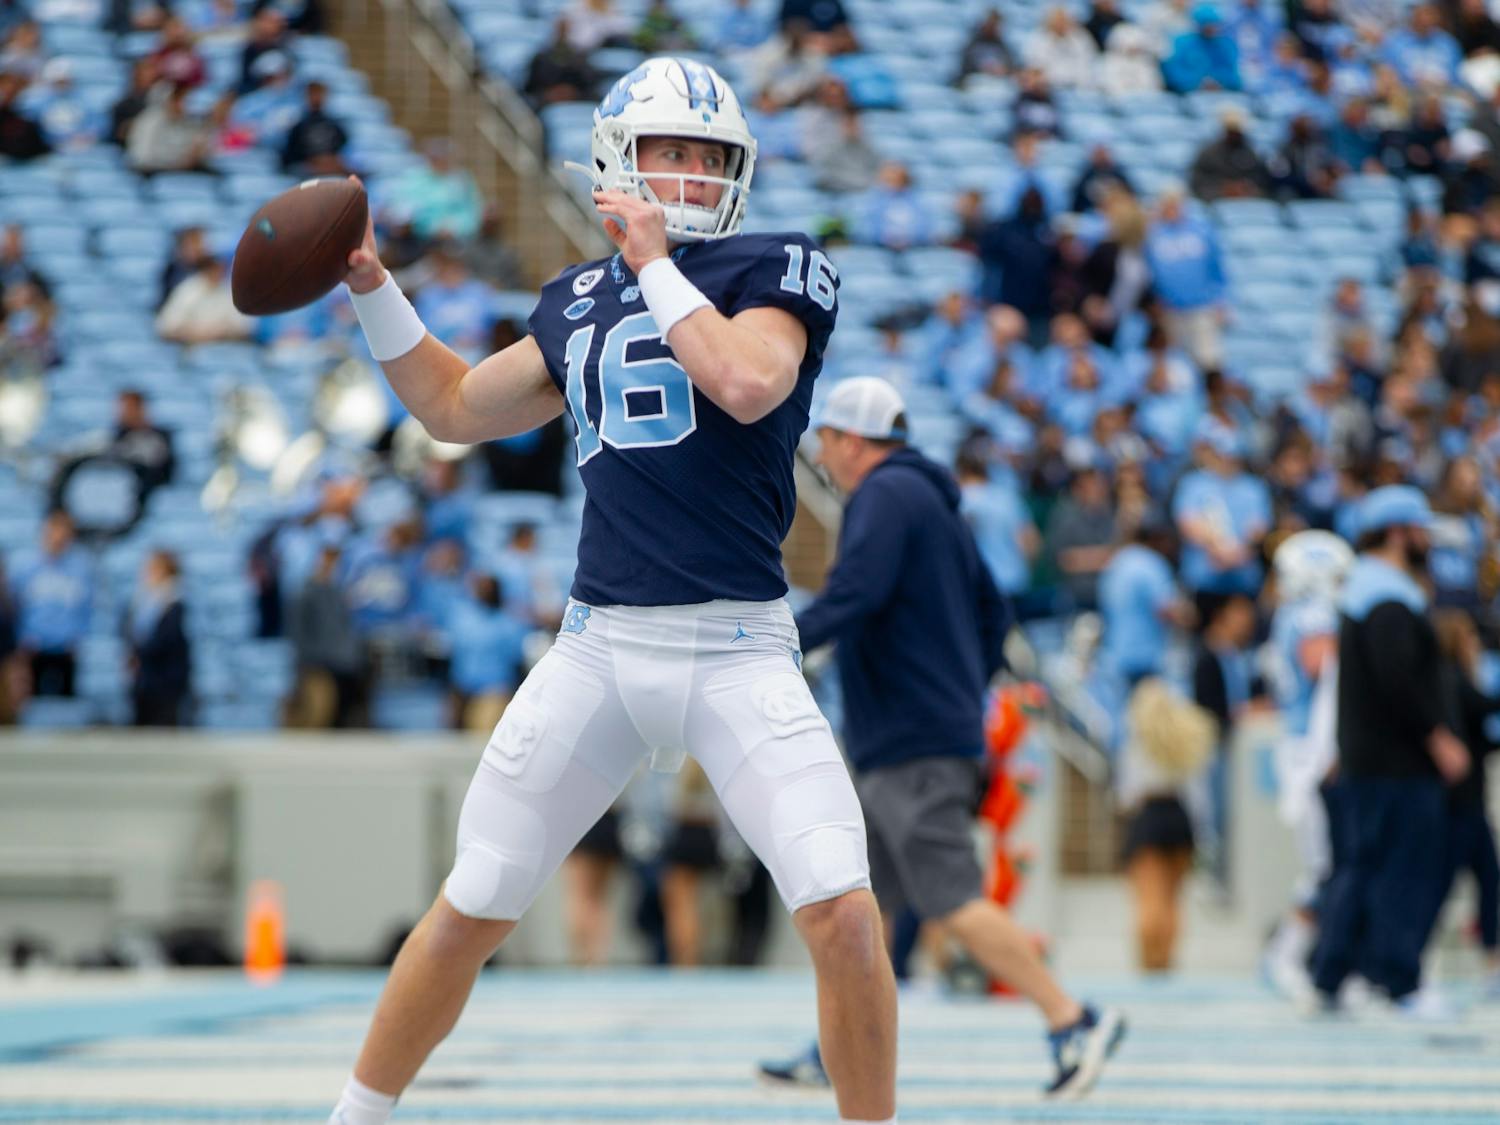 Russell Tabor (16), redshirt freshman quarterback, warms up before UNC football's spring scrimmage in Chapel Hill, NC, on April 9, 2022.